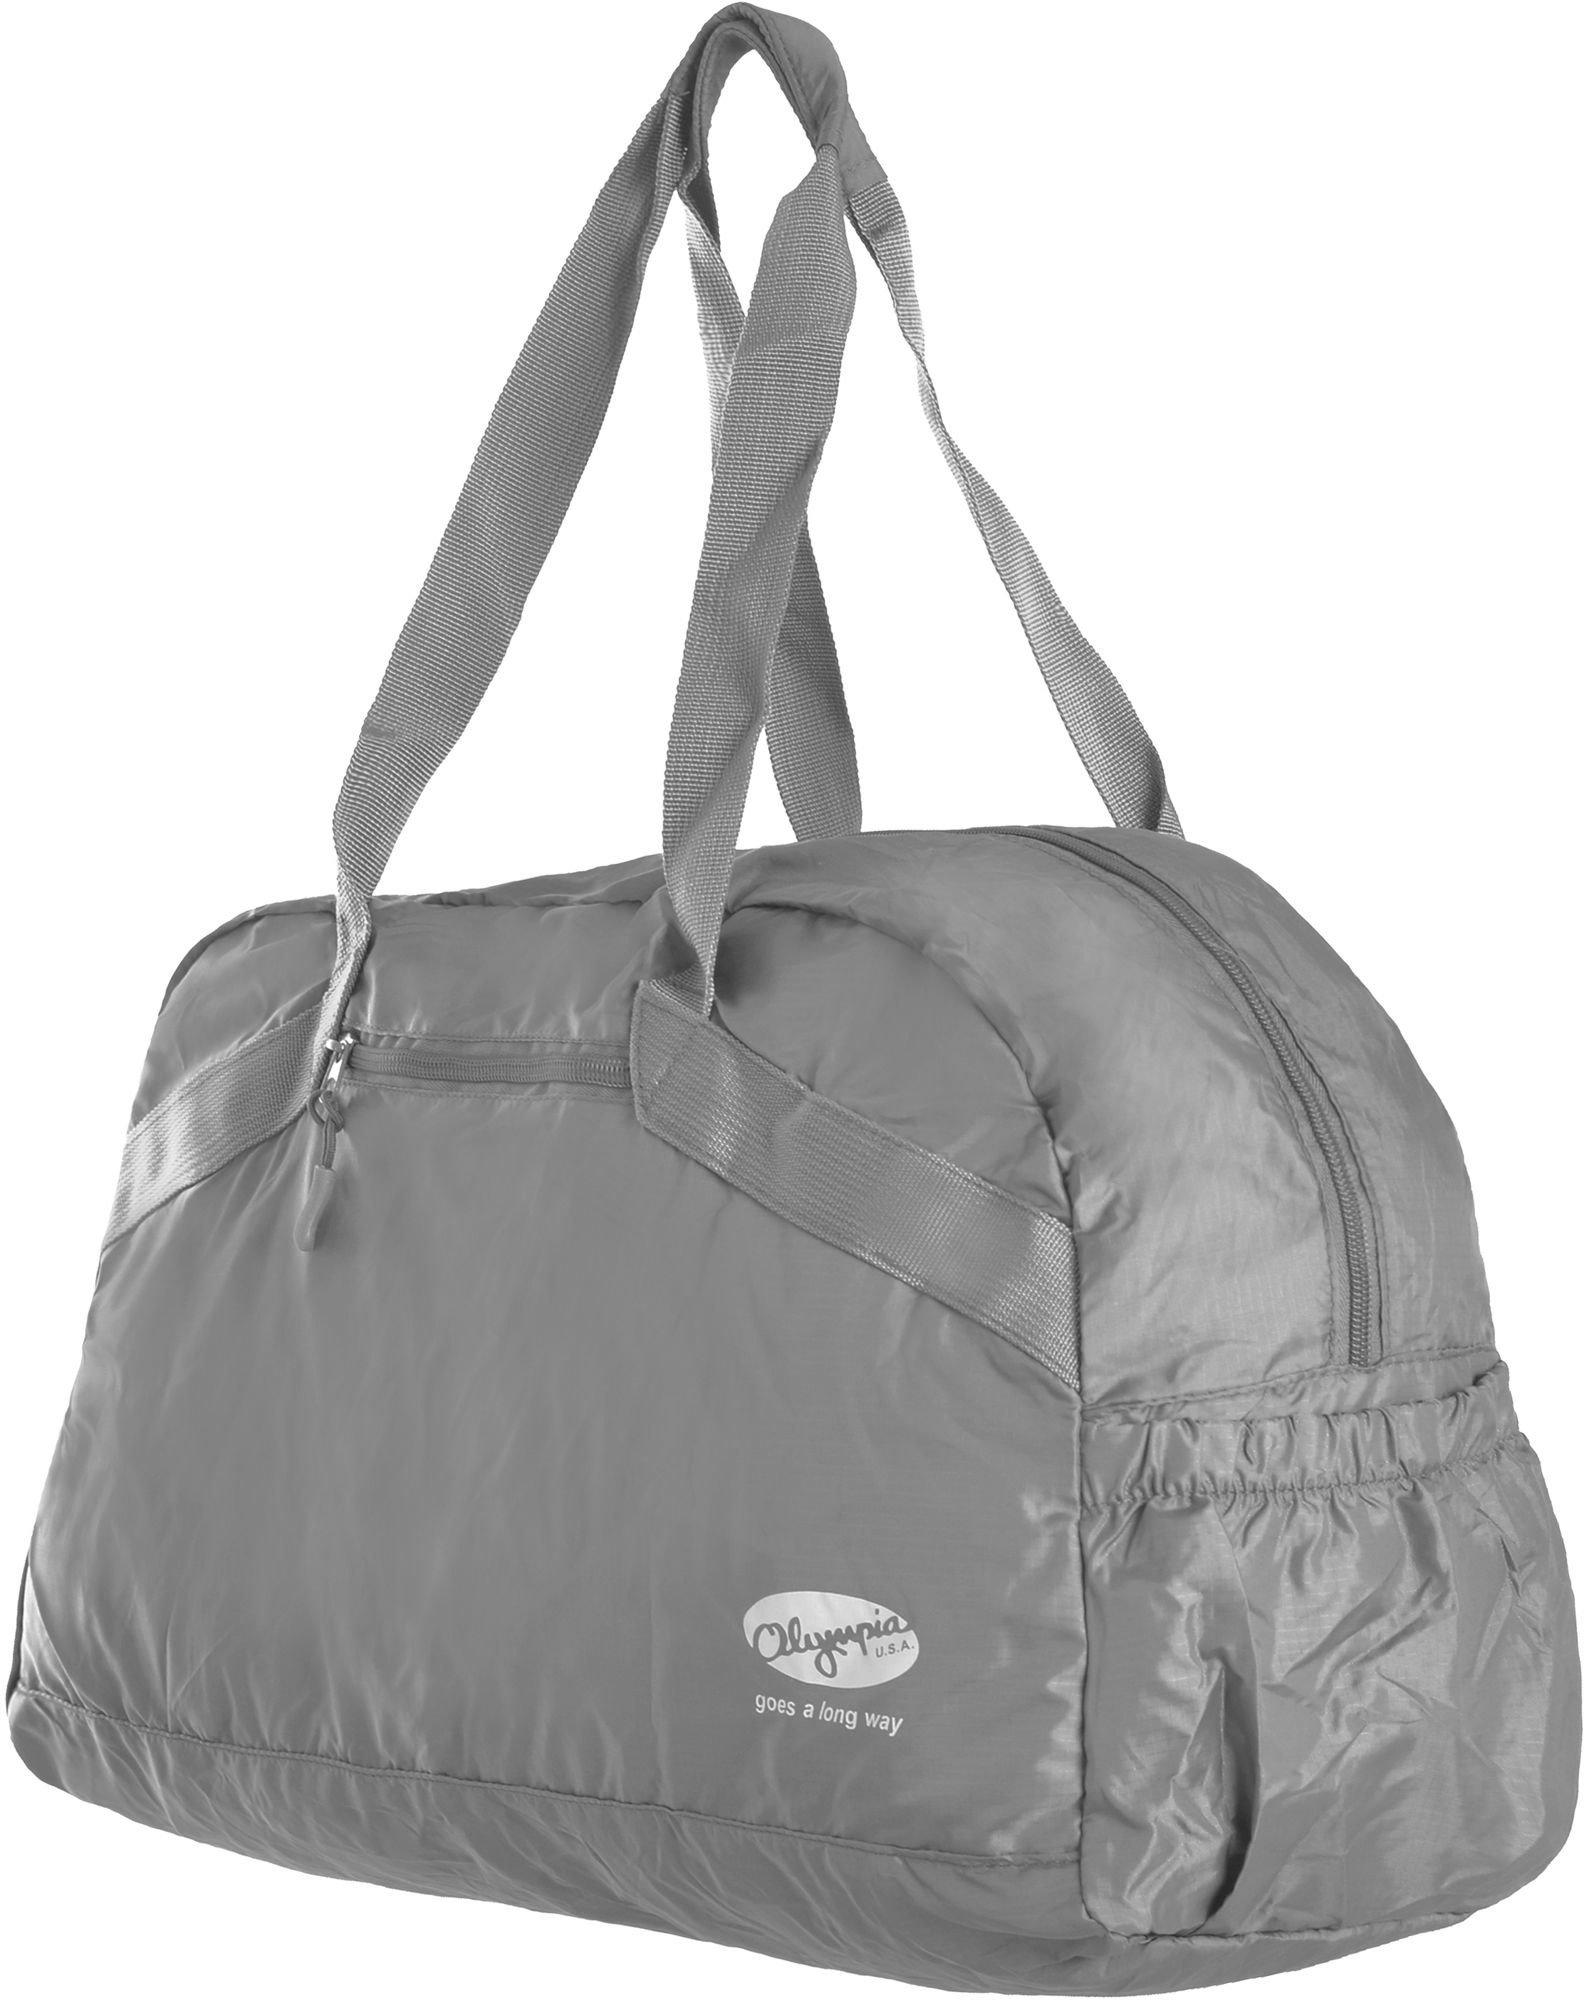 Olympia Luggage Packable Shoulder Tote